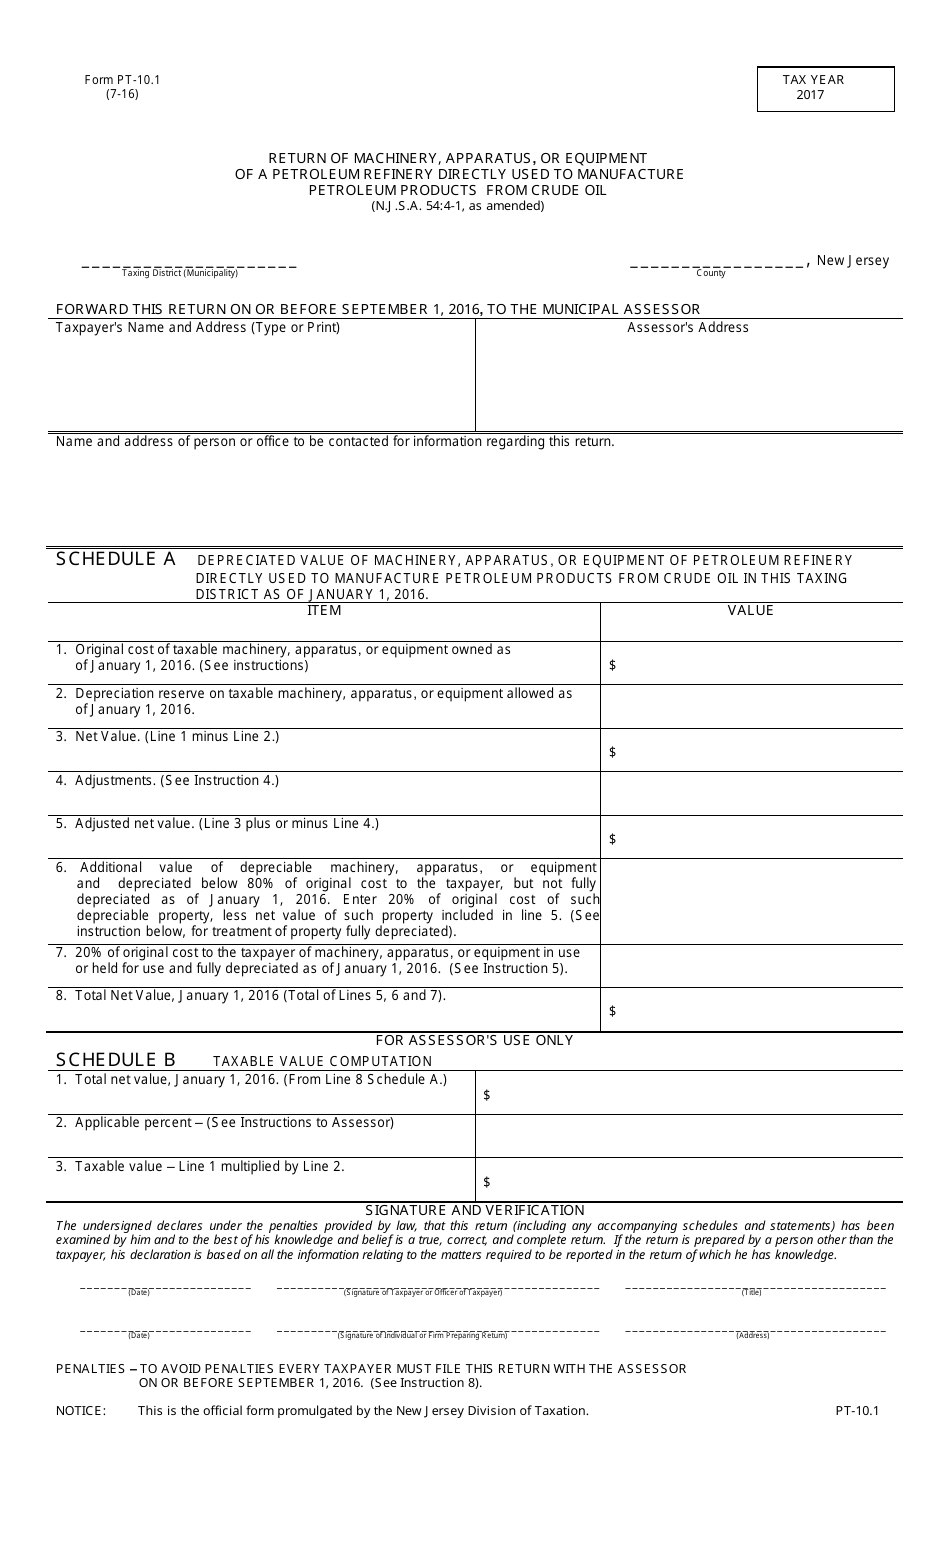 Form PT-10.1 Return of Machinery, Apparatus, or Equipment of a Petroleum Refinery Directly Used to Manufacture Pertoleum Products From Crude Oil - New Jersey, Page 1